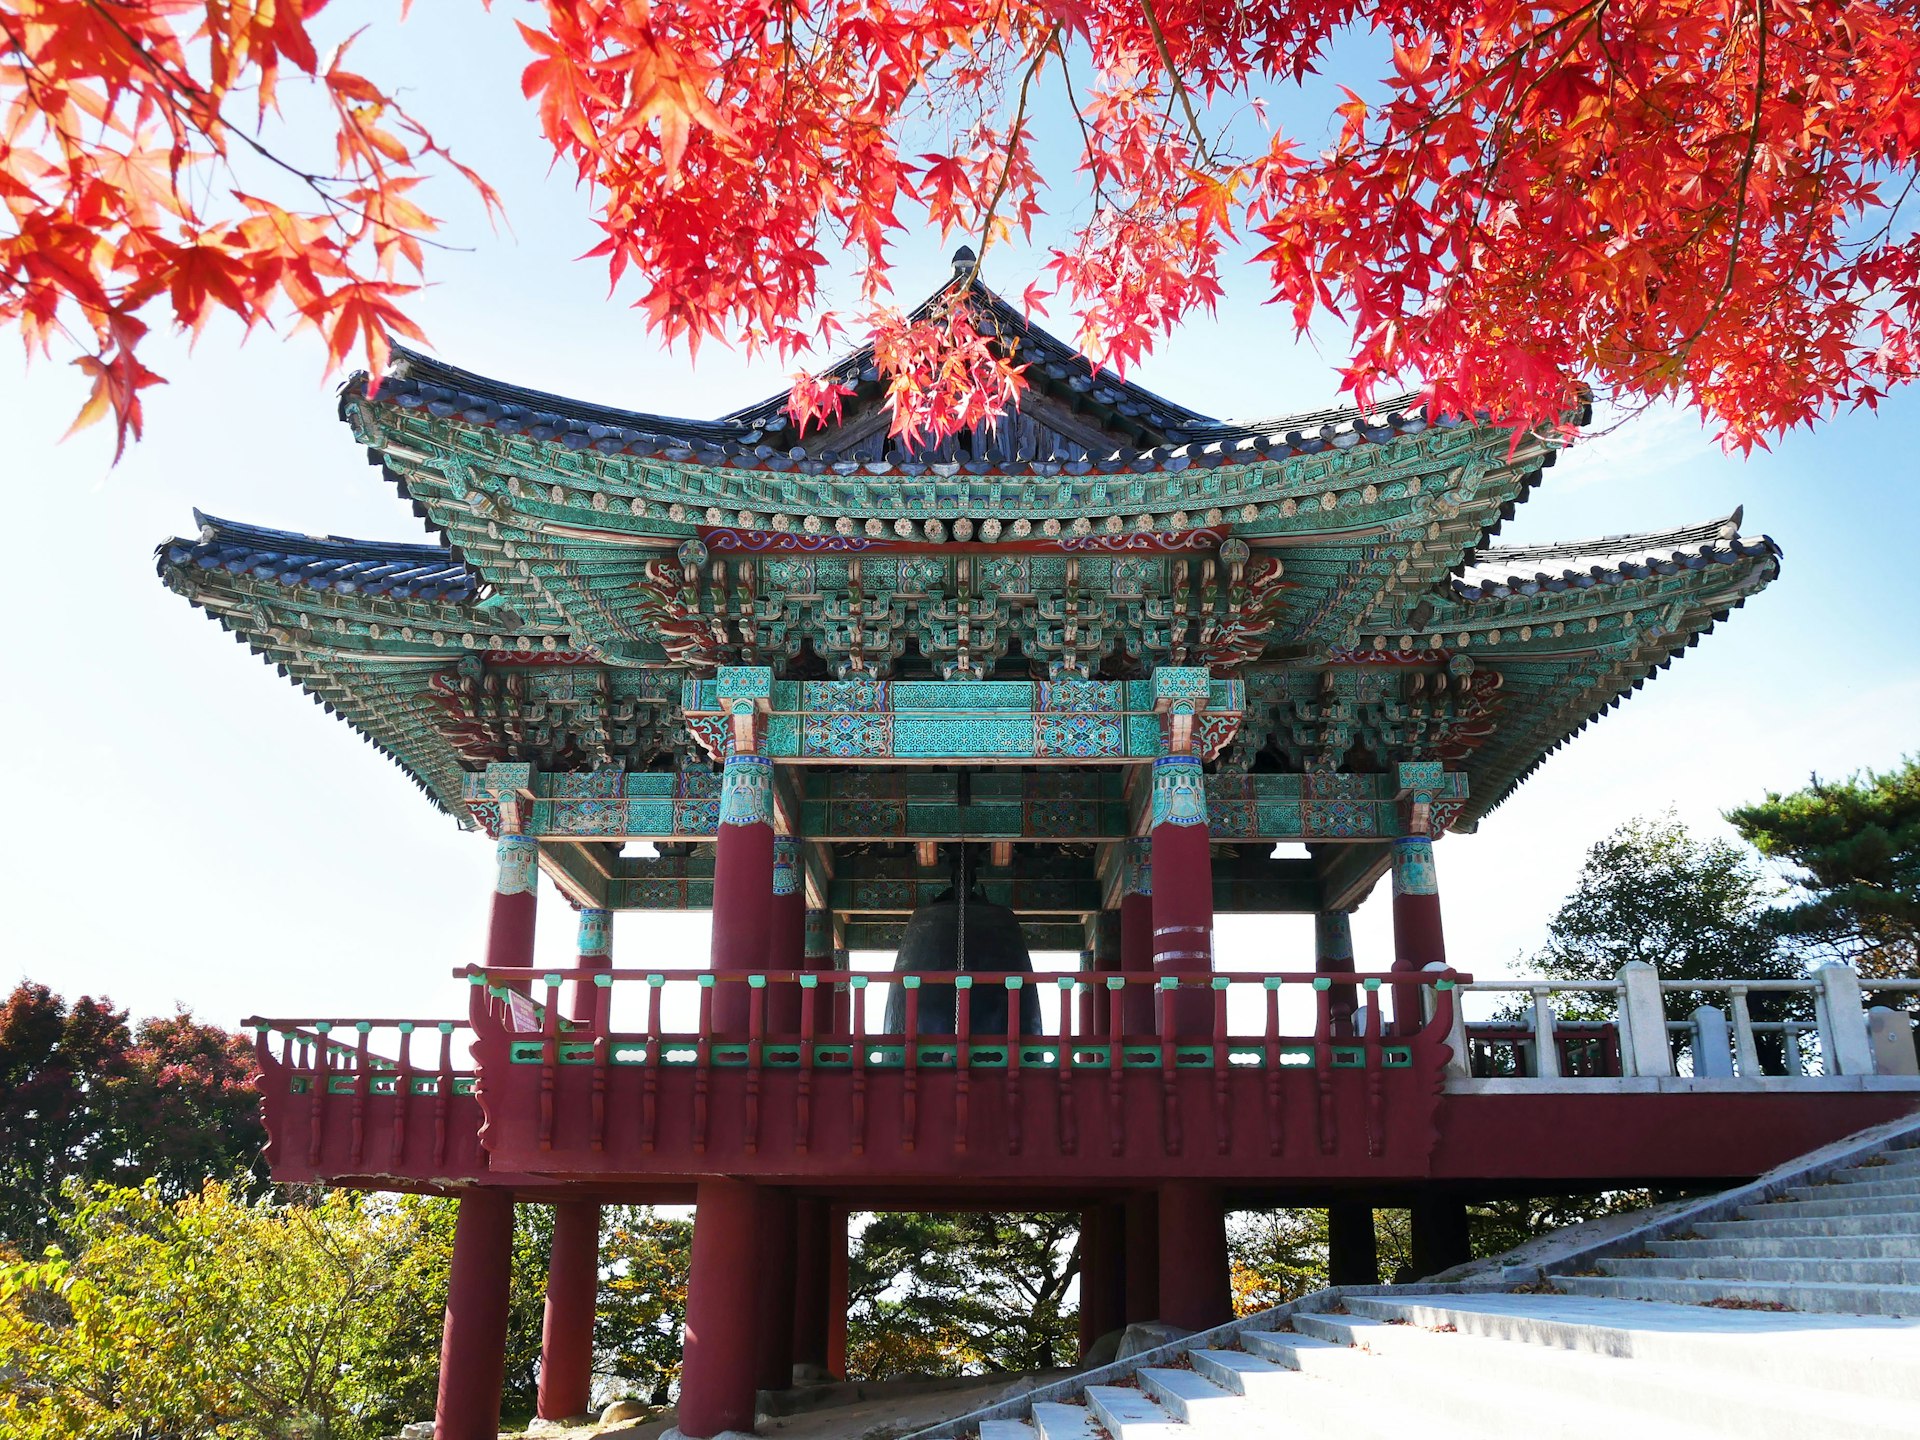 Red maple leaves in the foreground, in front of the bell pavilion at Seokguram Grotto in Gyeongju, South Korea.